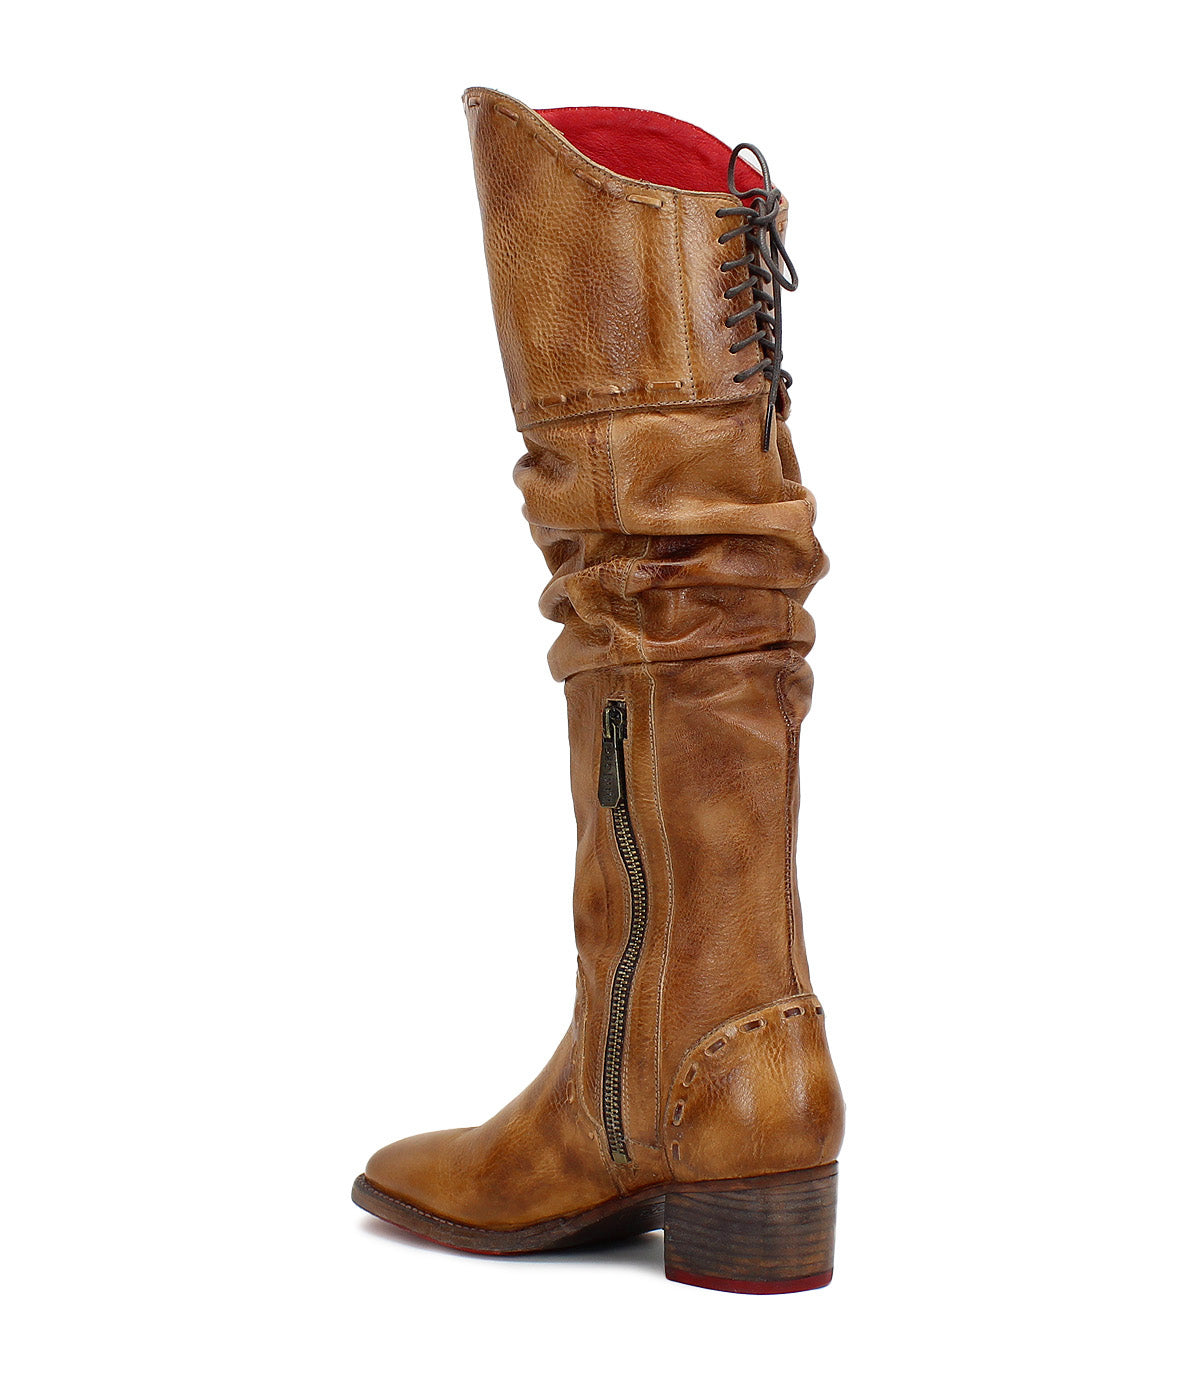 A women's tan Leilani boot with a zipper by Bed Stu.